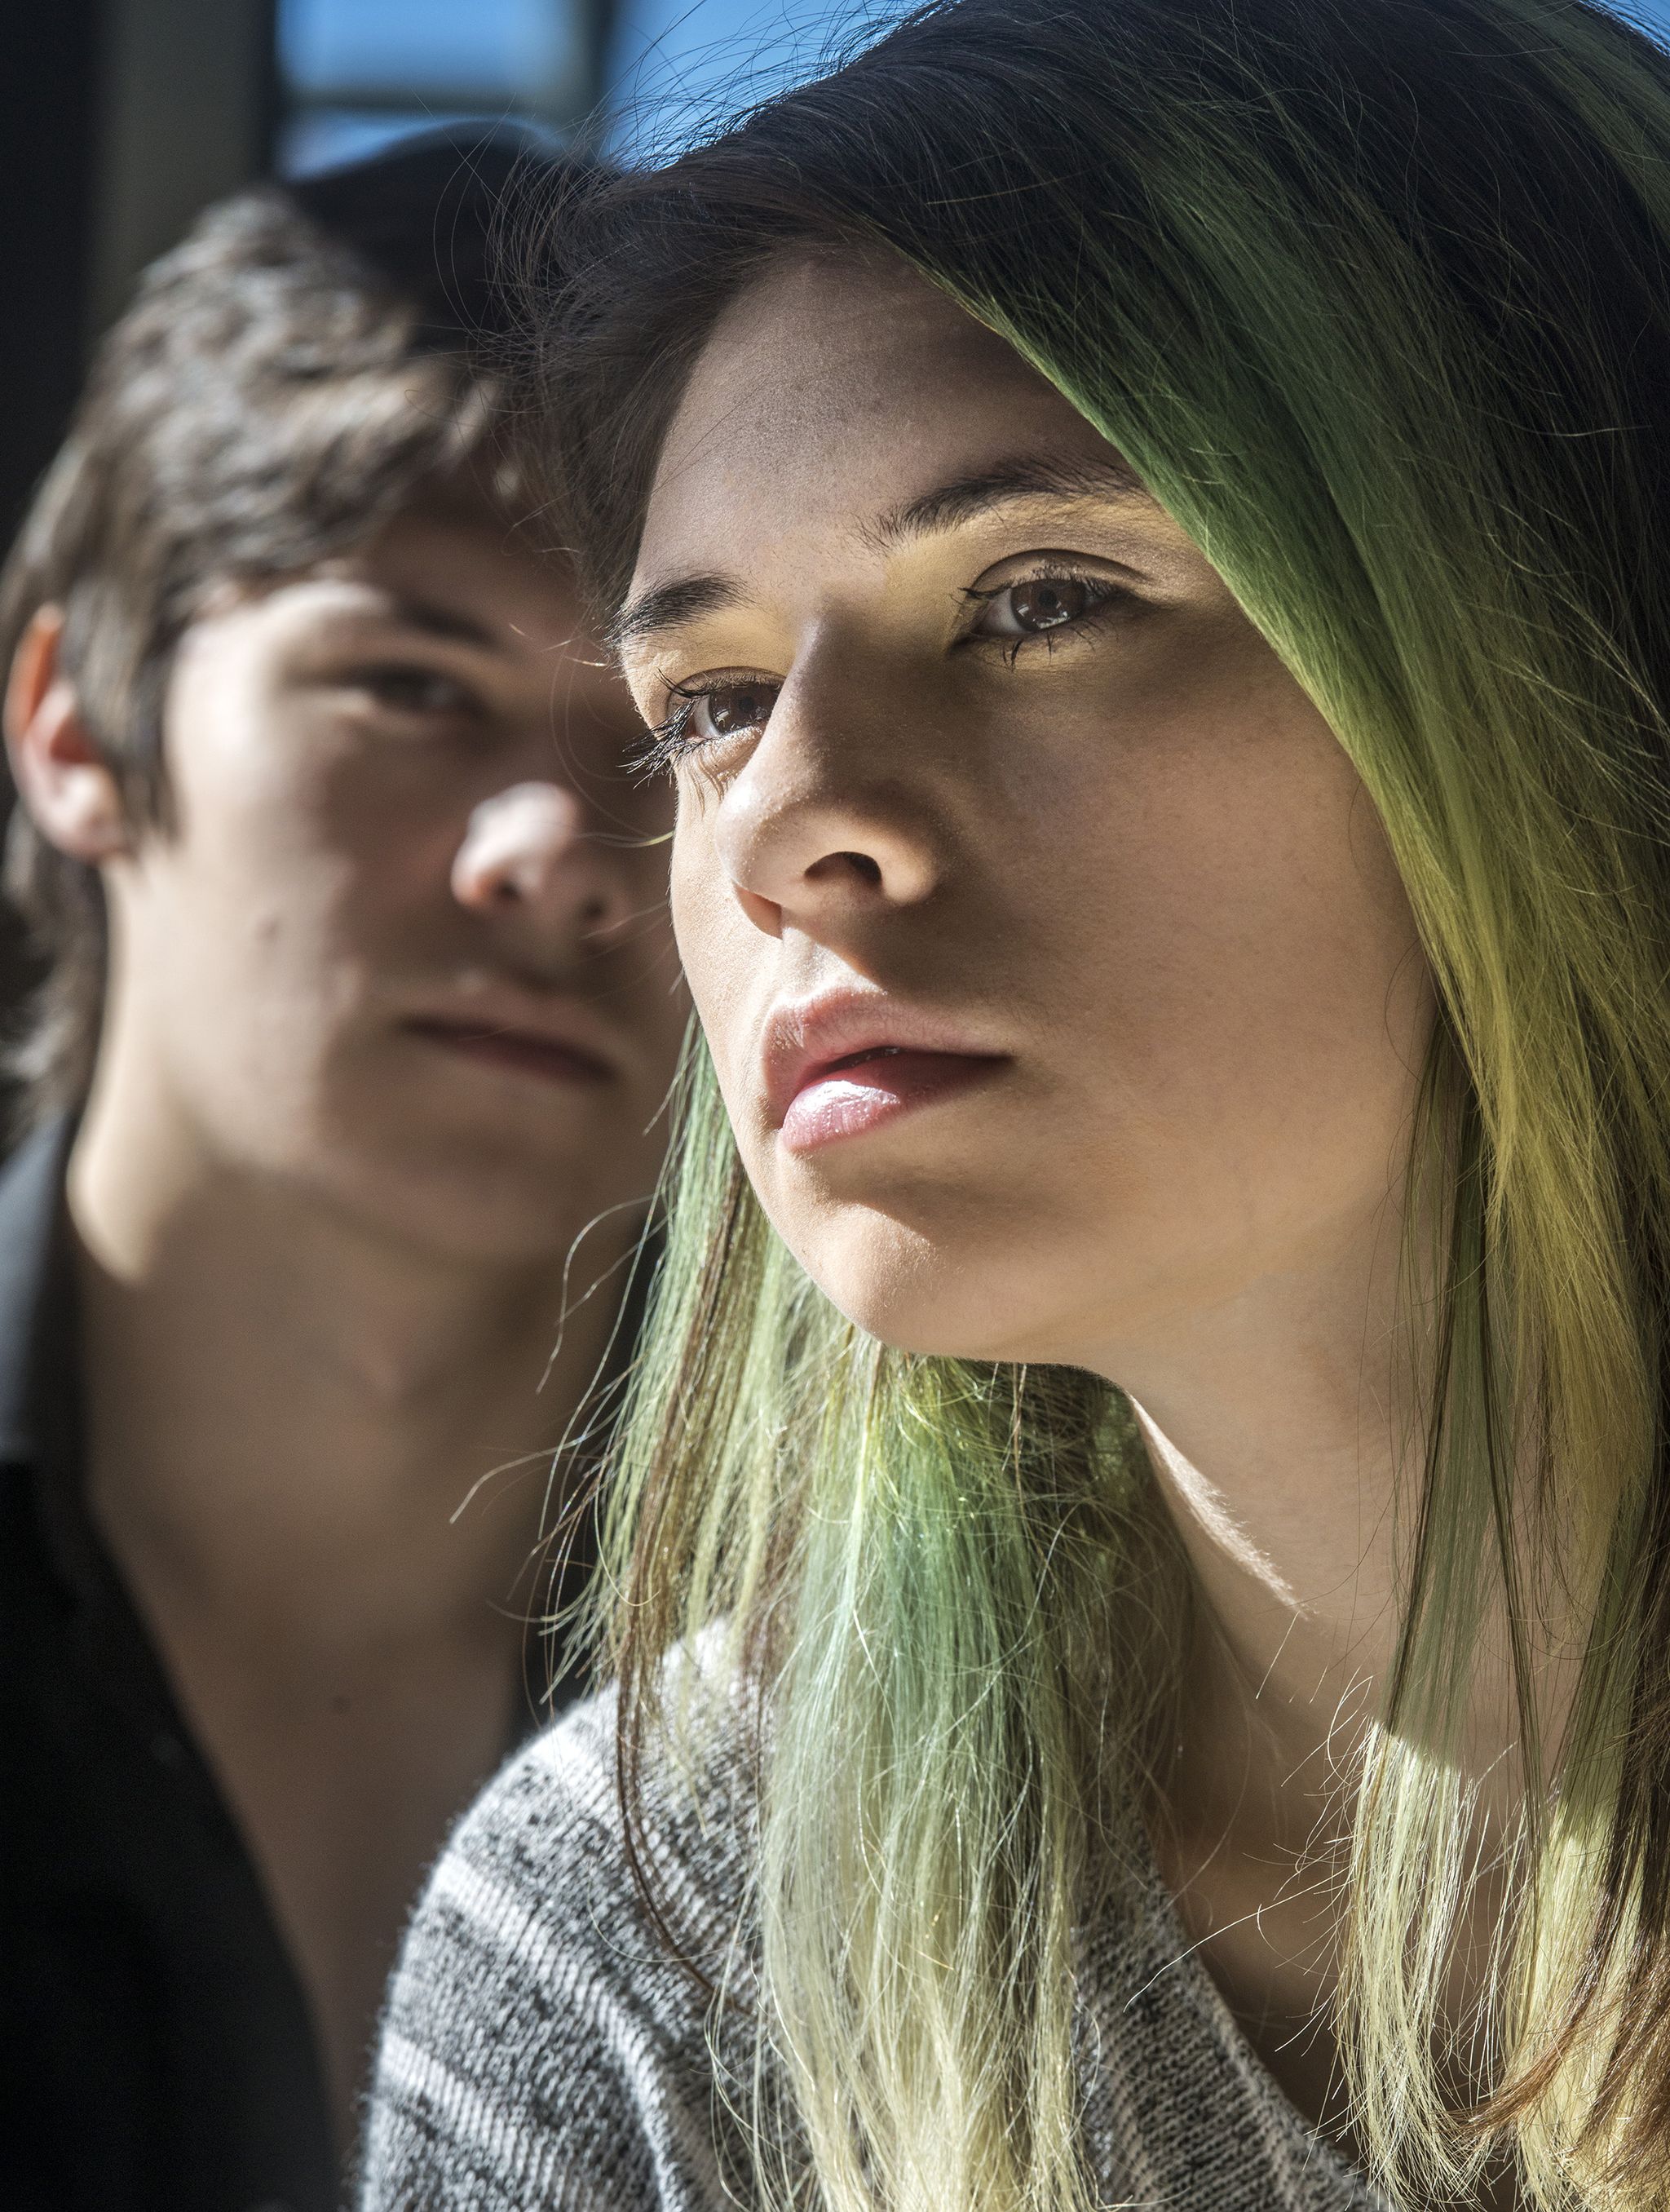 Jonas and Nicole Maines, both 18, photographed in Denver, CO.